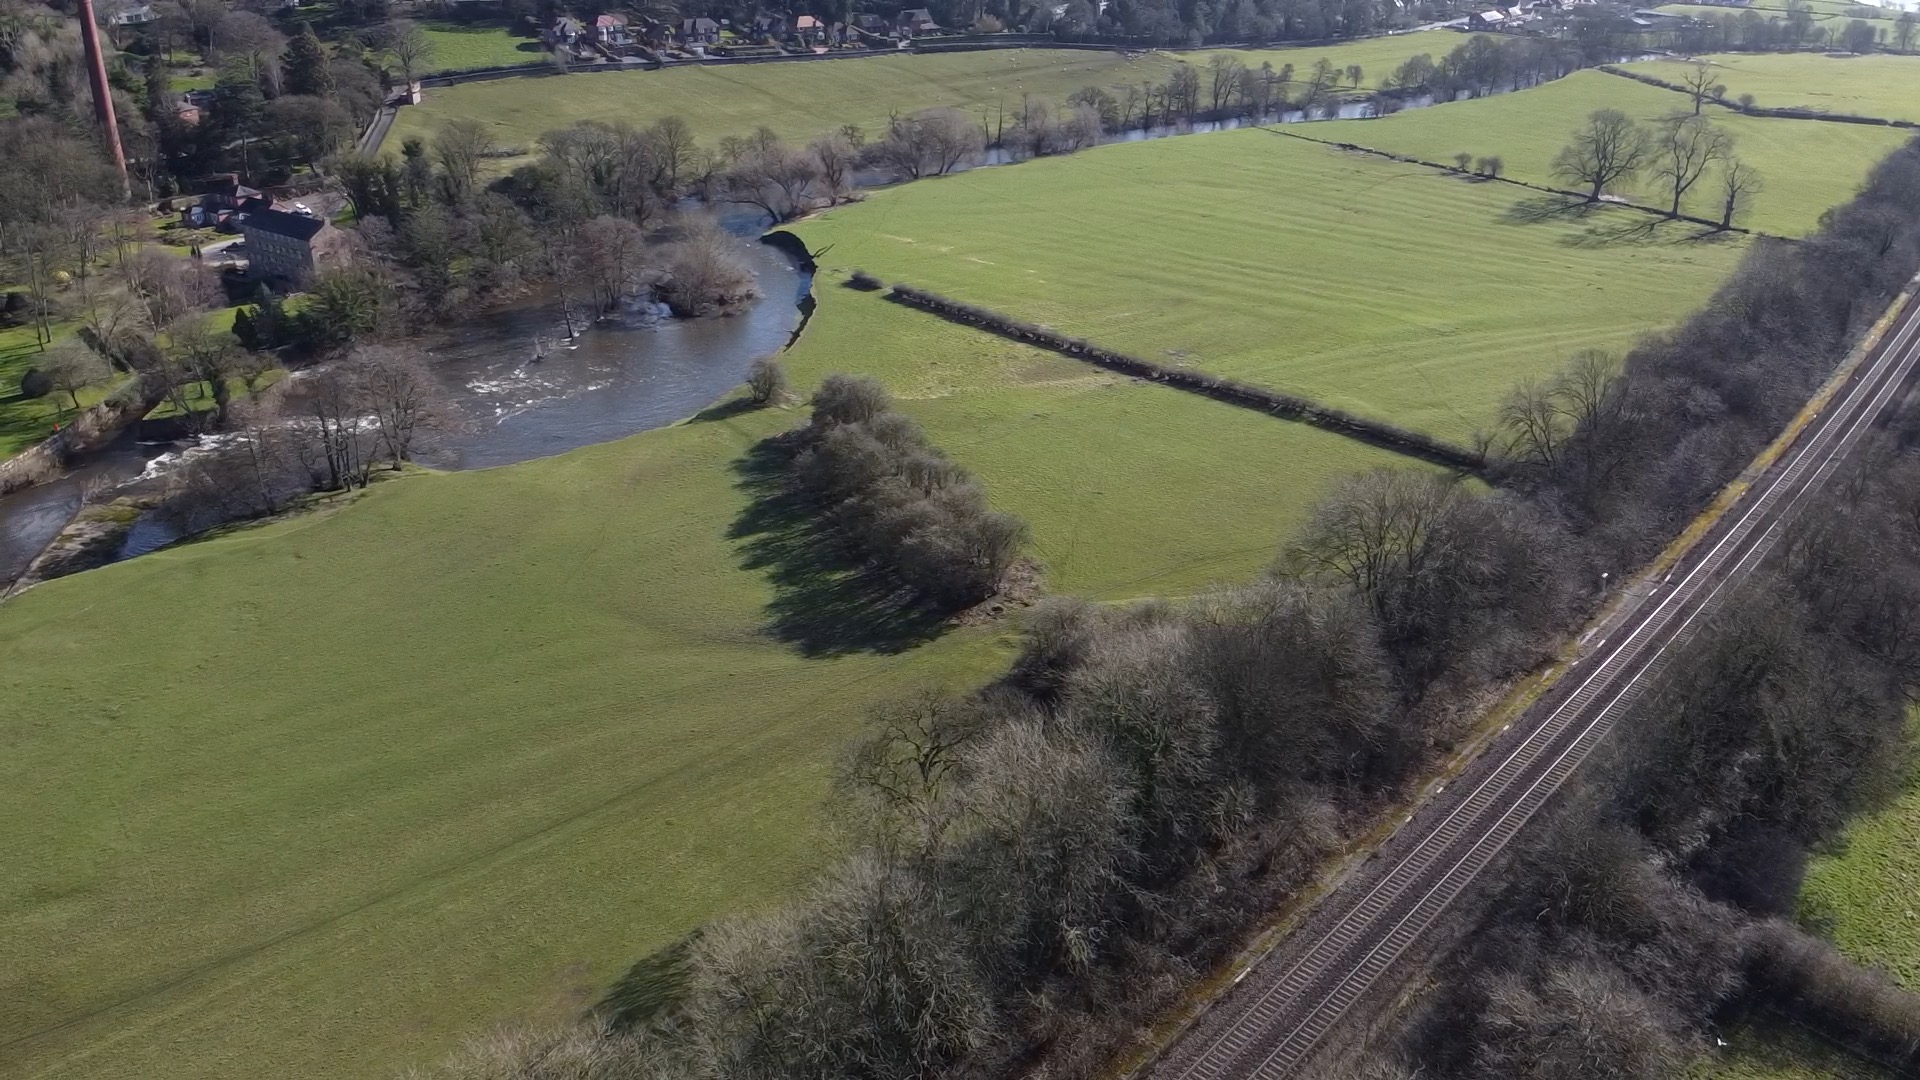 An aerial view of the River Derwent in the area of PWeckwash Mill